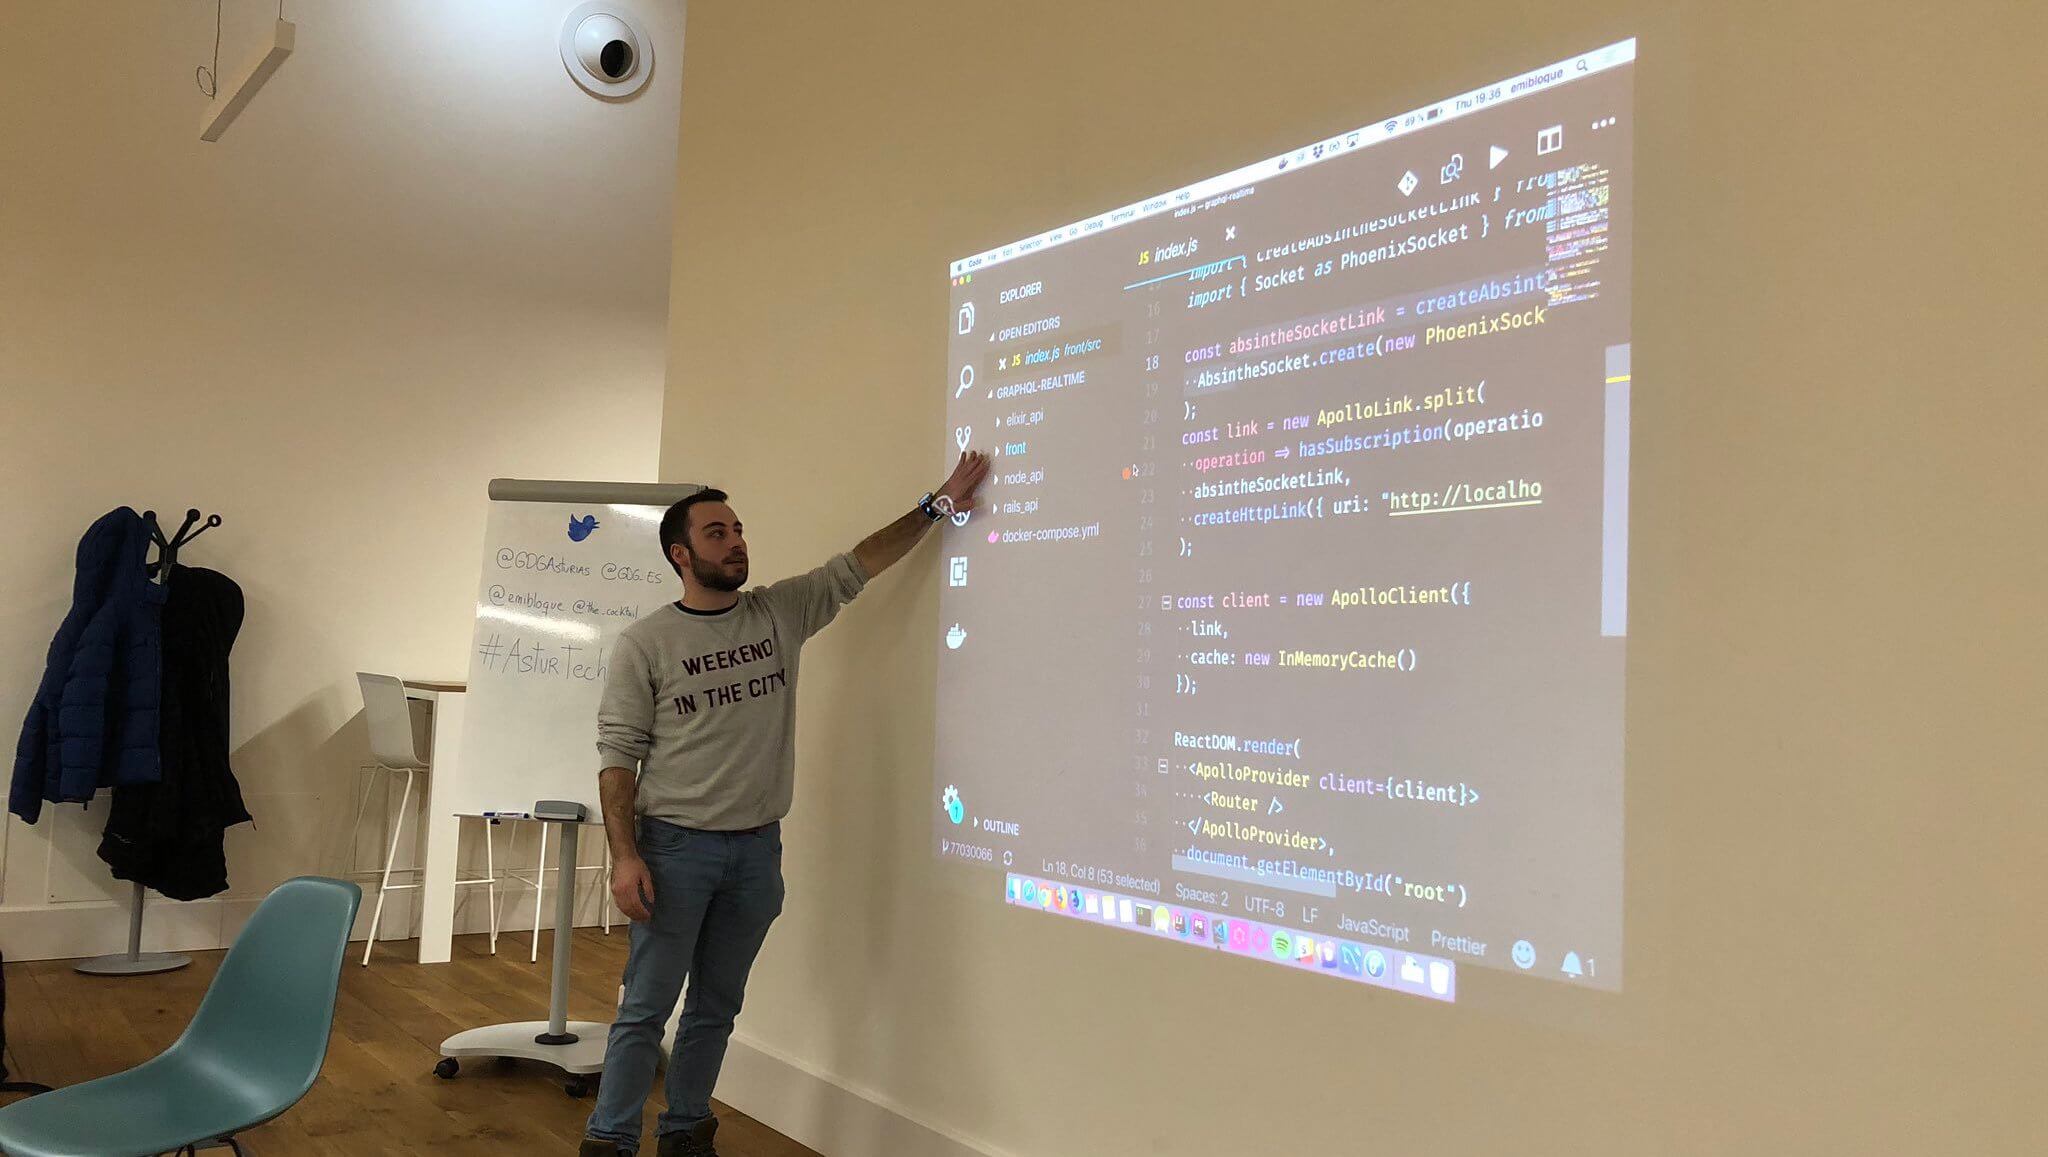 Me pointing to code